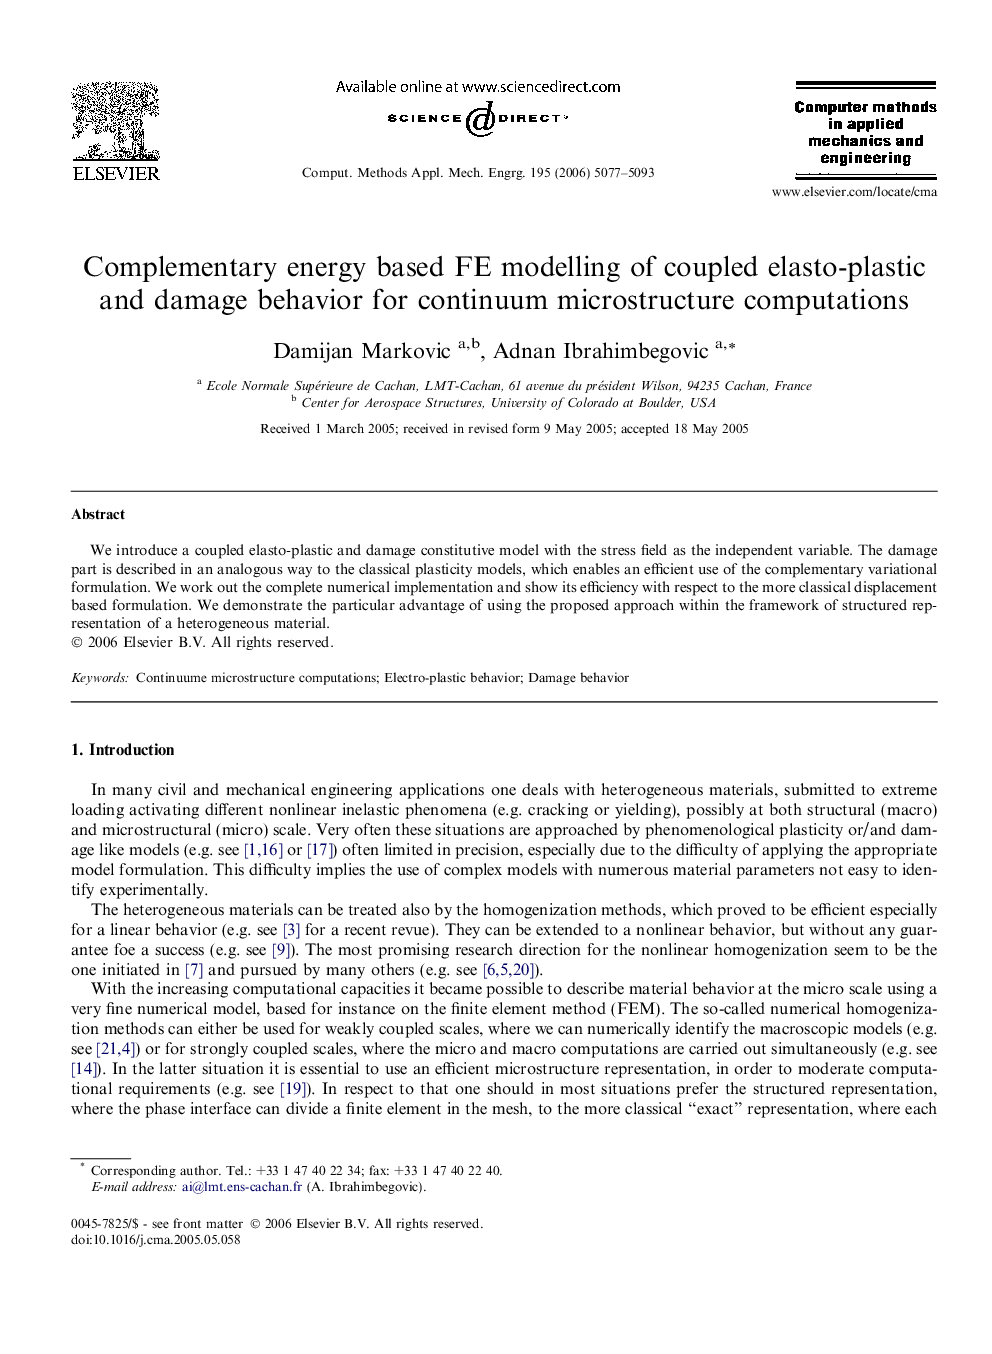 Complementary energy based FE modelling of coupled elasto-plastic and damage behavior for continuum microstructure computations